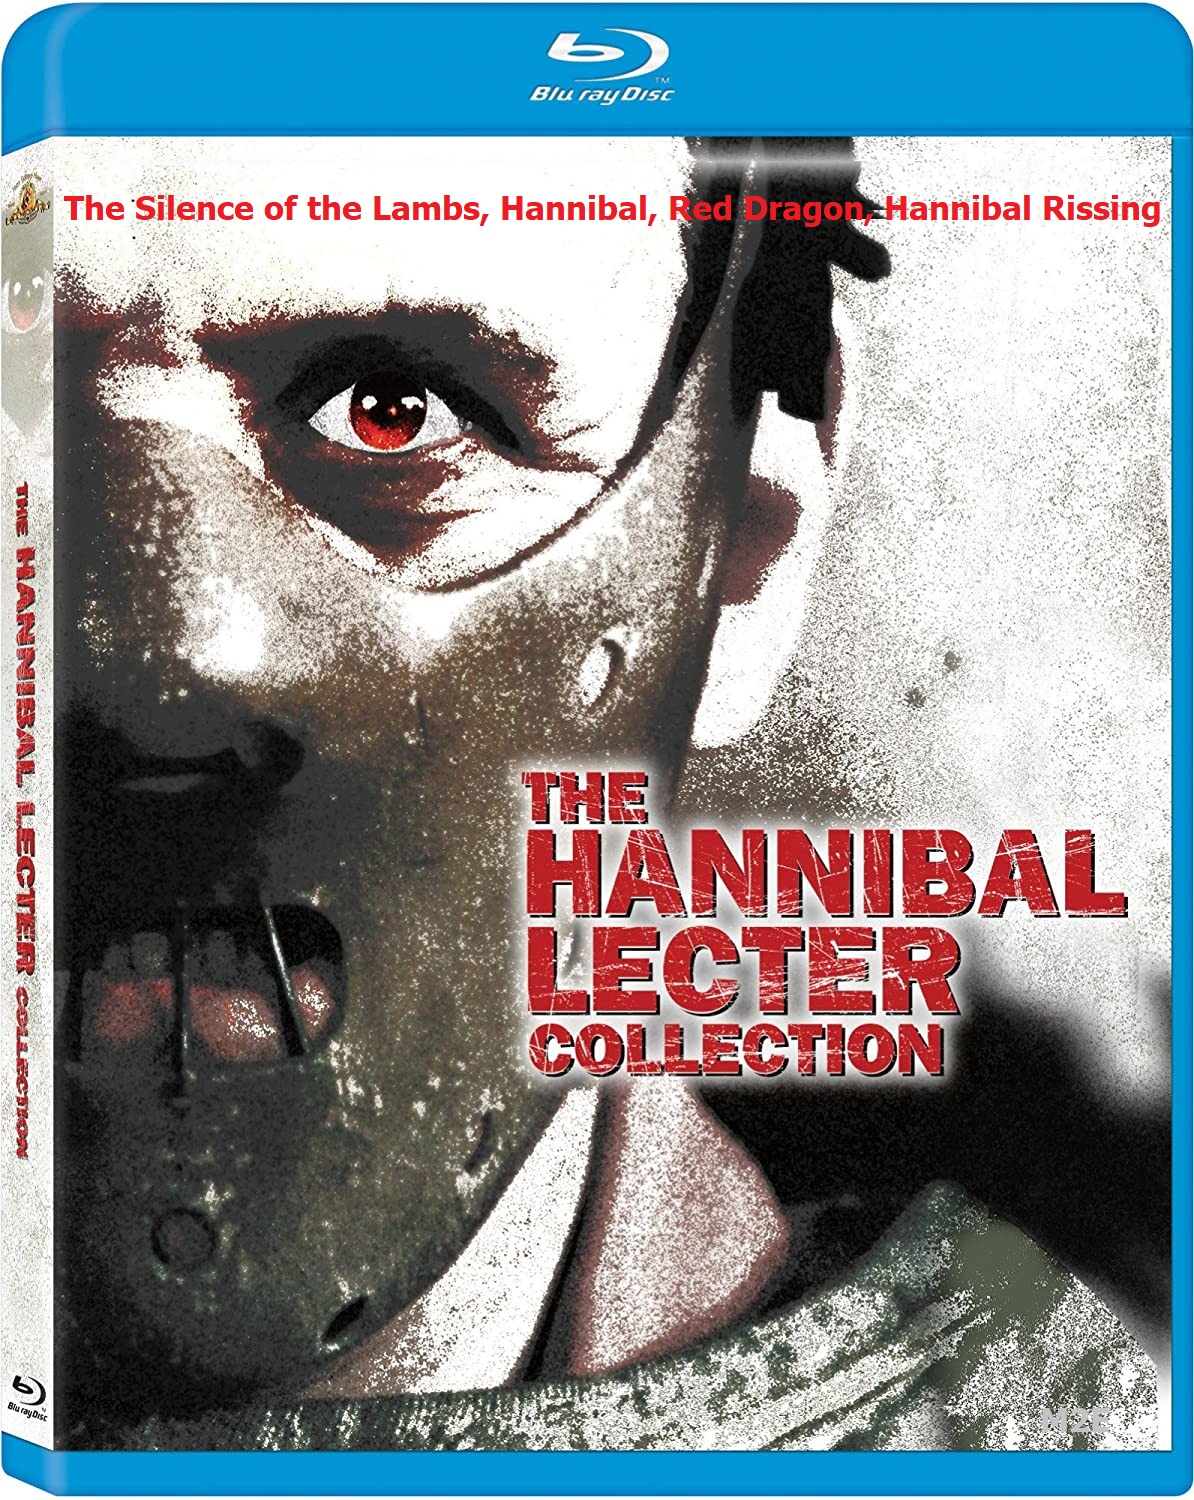 The Hannibal Lecter 1080p DTS Collection